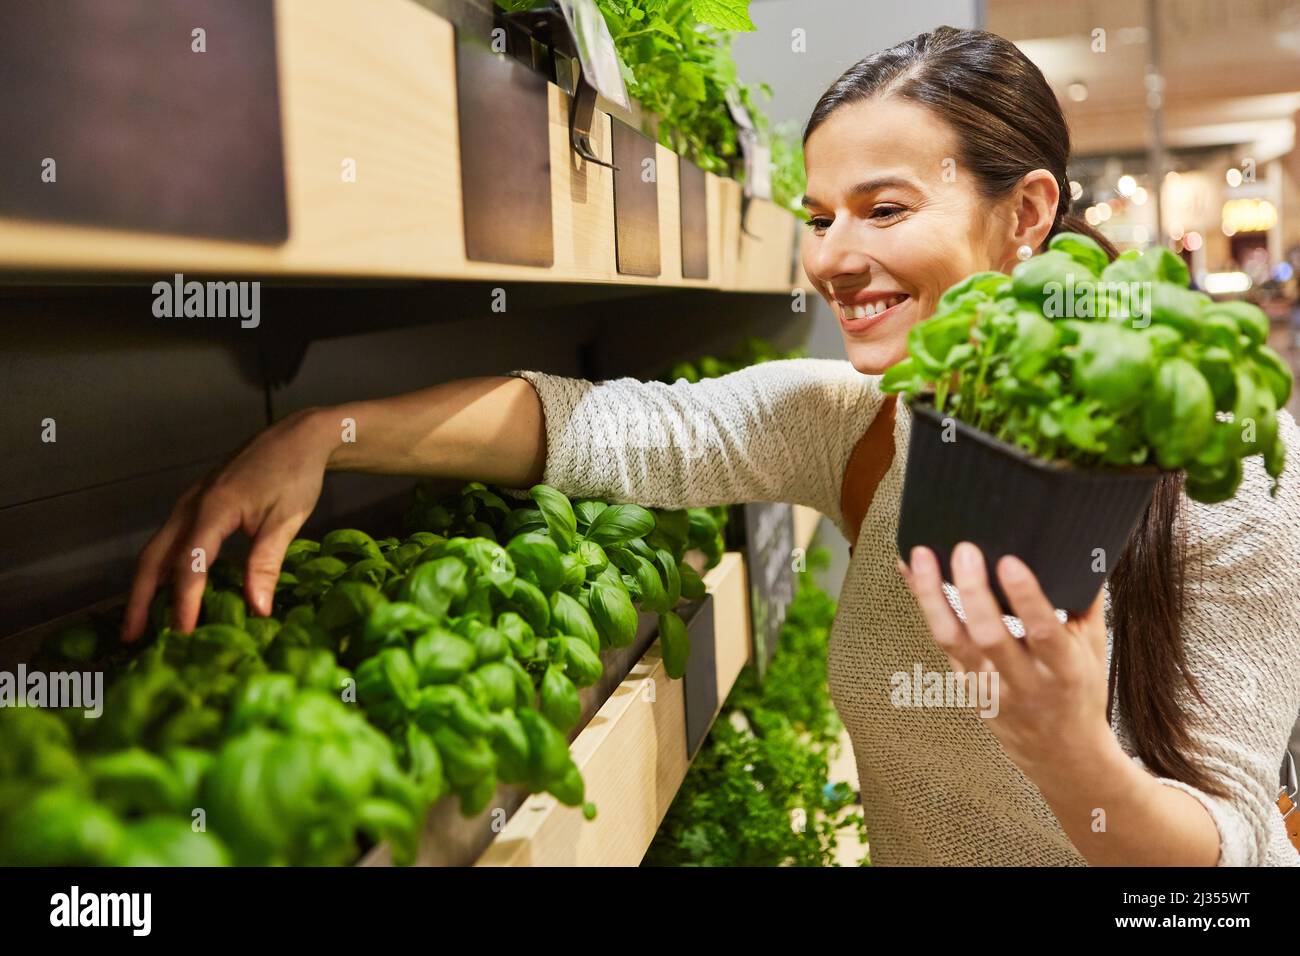 Young woman as a smiling customer at the herb shelf buys basil in the supermarket Stock Photo